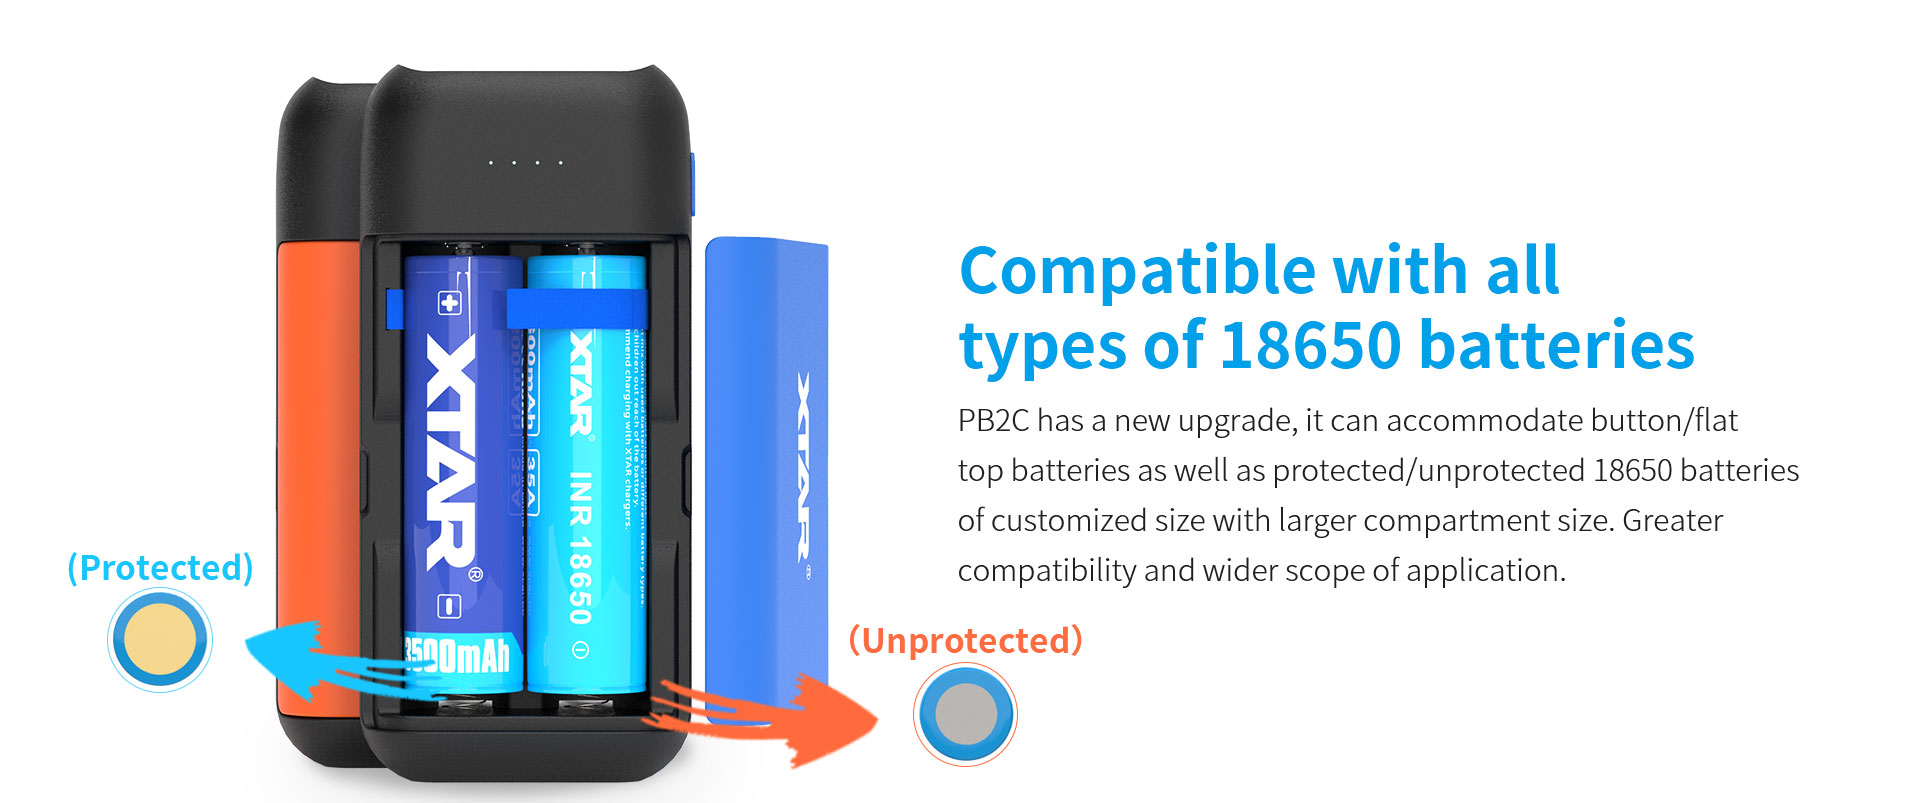 PB2C is compatible with all types of 18650 batteries, including button top, protected and customized sizes.